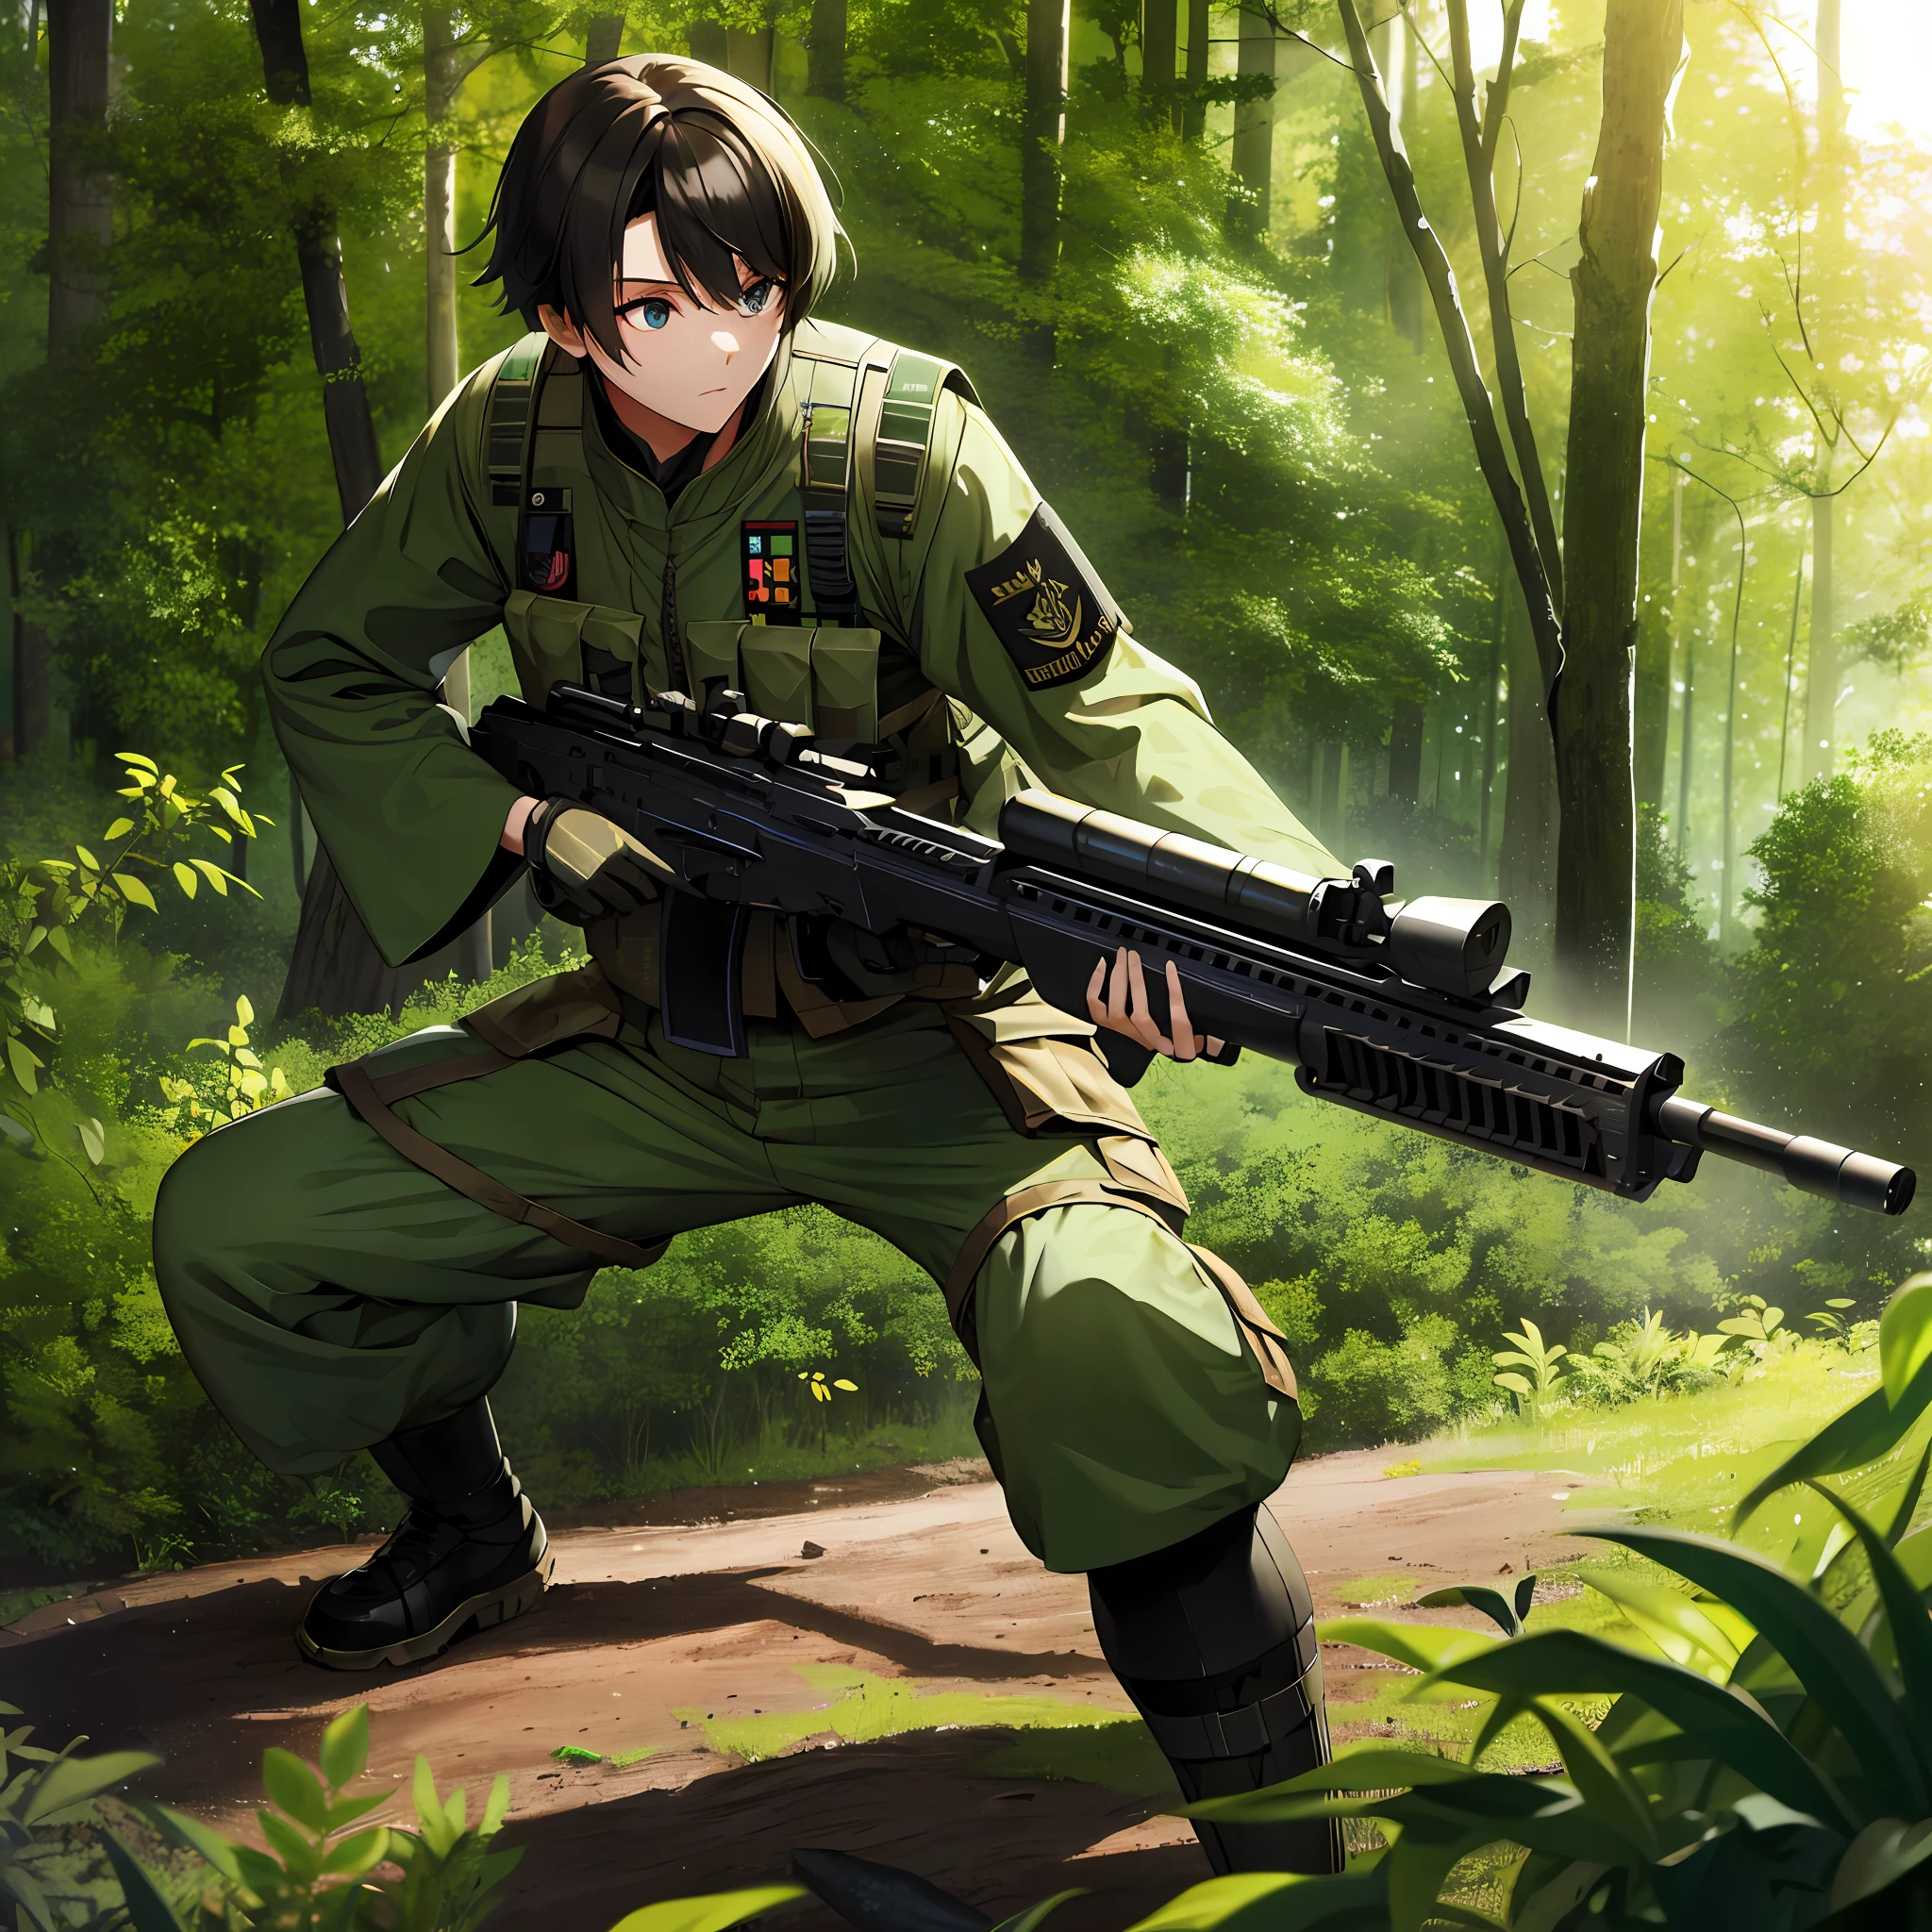 Oozora Subaru with a detailed military suit of the Japanese army Grabbing a large caliber weapon also detailed visualizing your environment in a forest or jungle Camouflaged ready to annihilate your opponent at any time and when necessary that everything else is 4k and hyperrealistic fully detailed